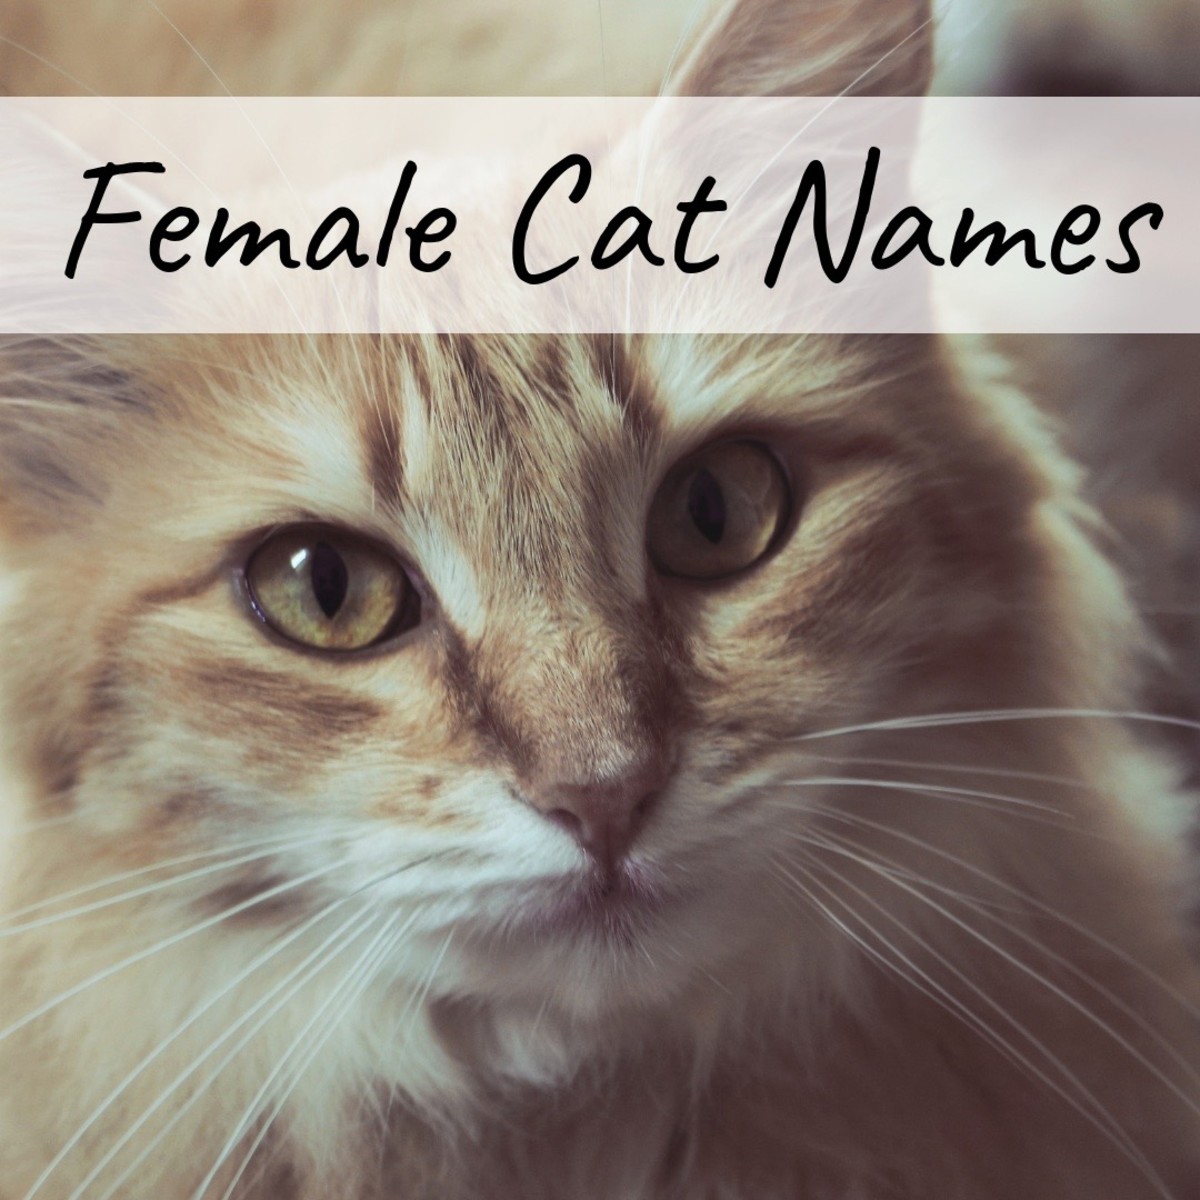 Check out the below list for a wide variety of names for your female kitty!